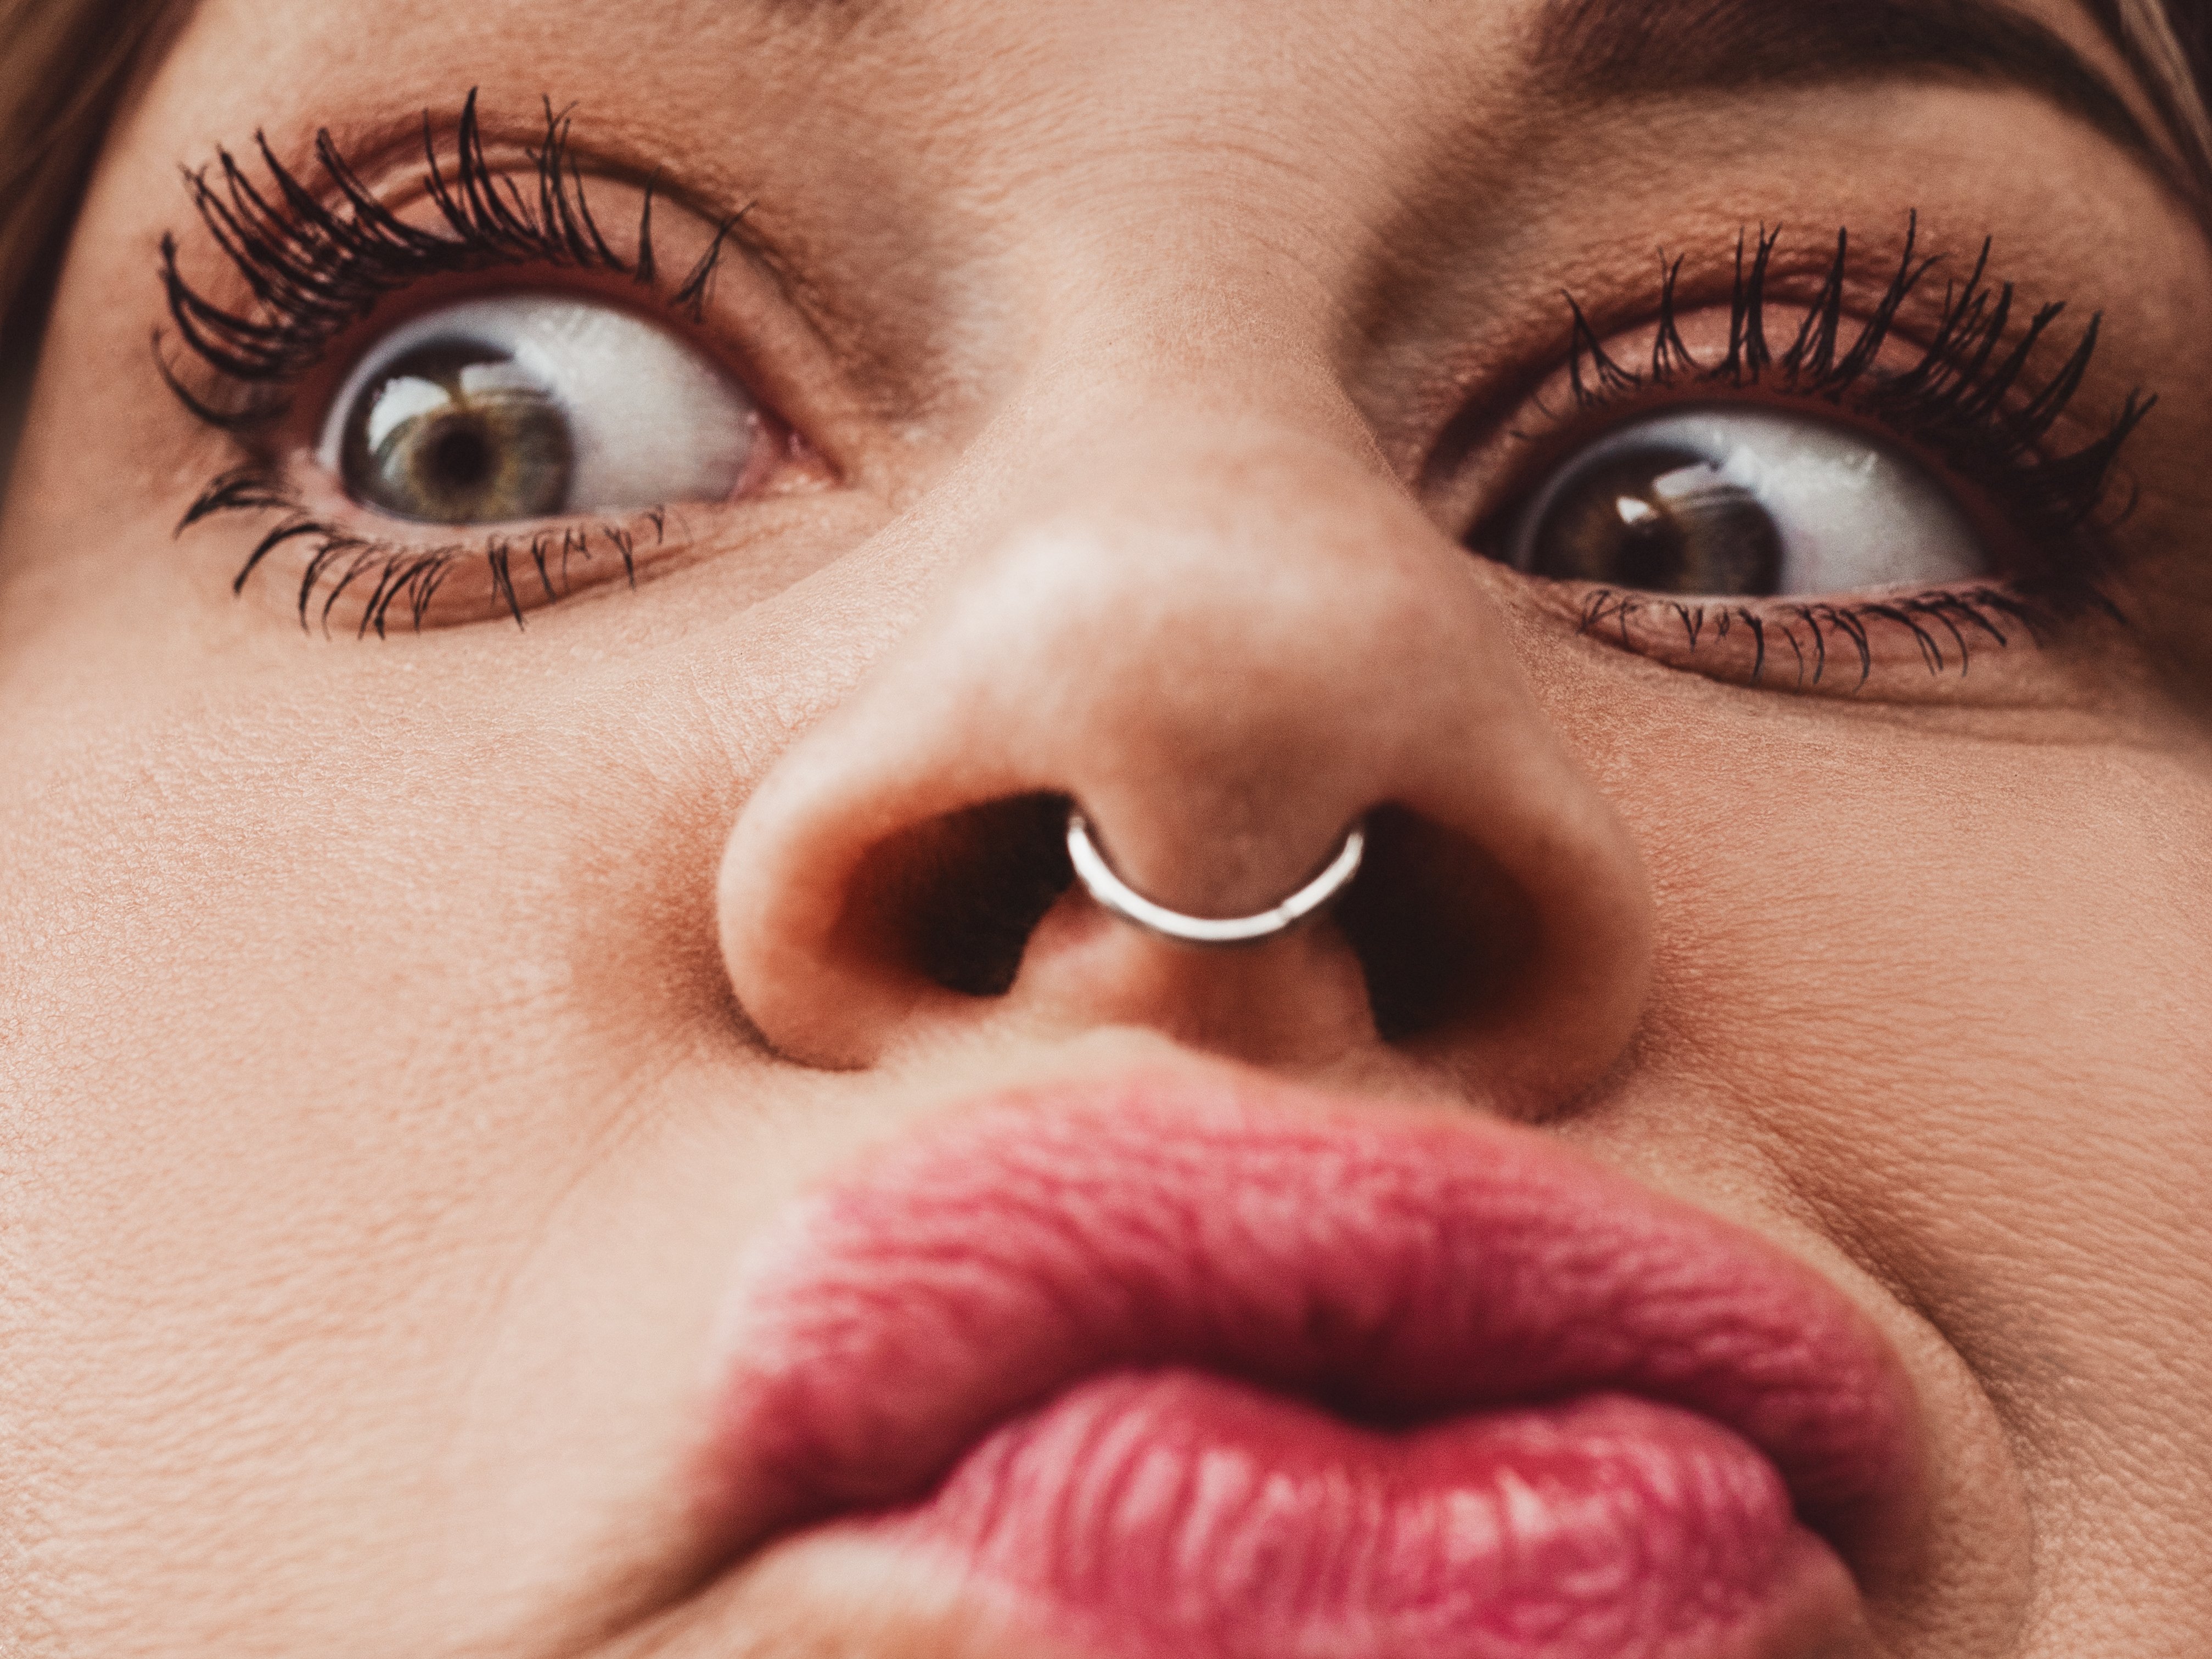 Woman with a septum piercing. | Source: Getty Images